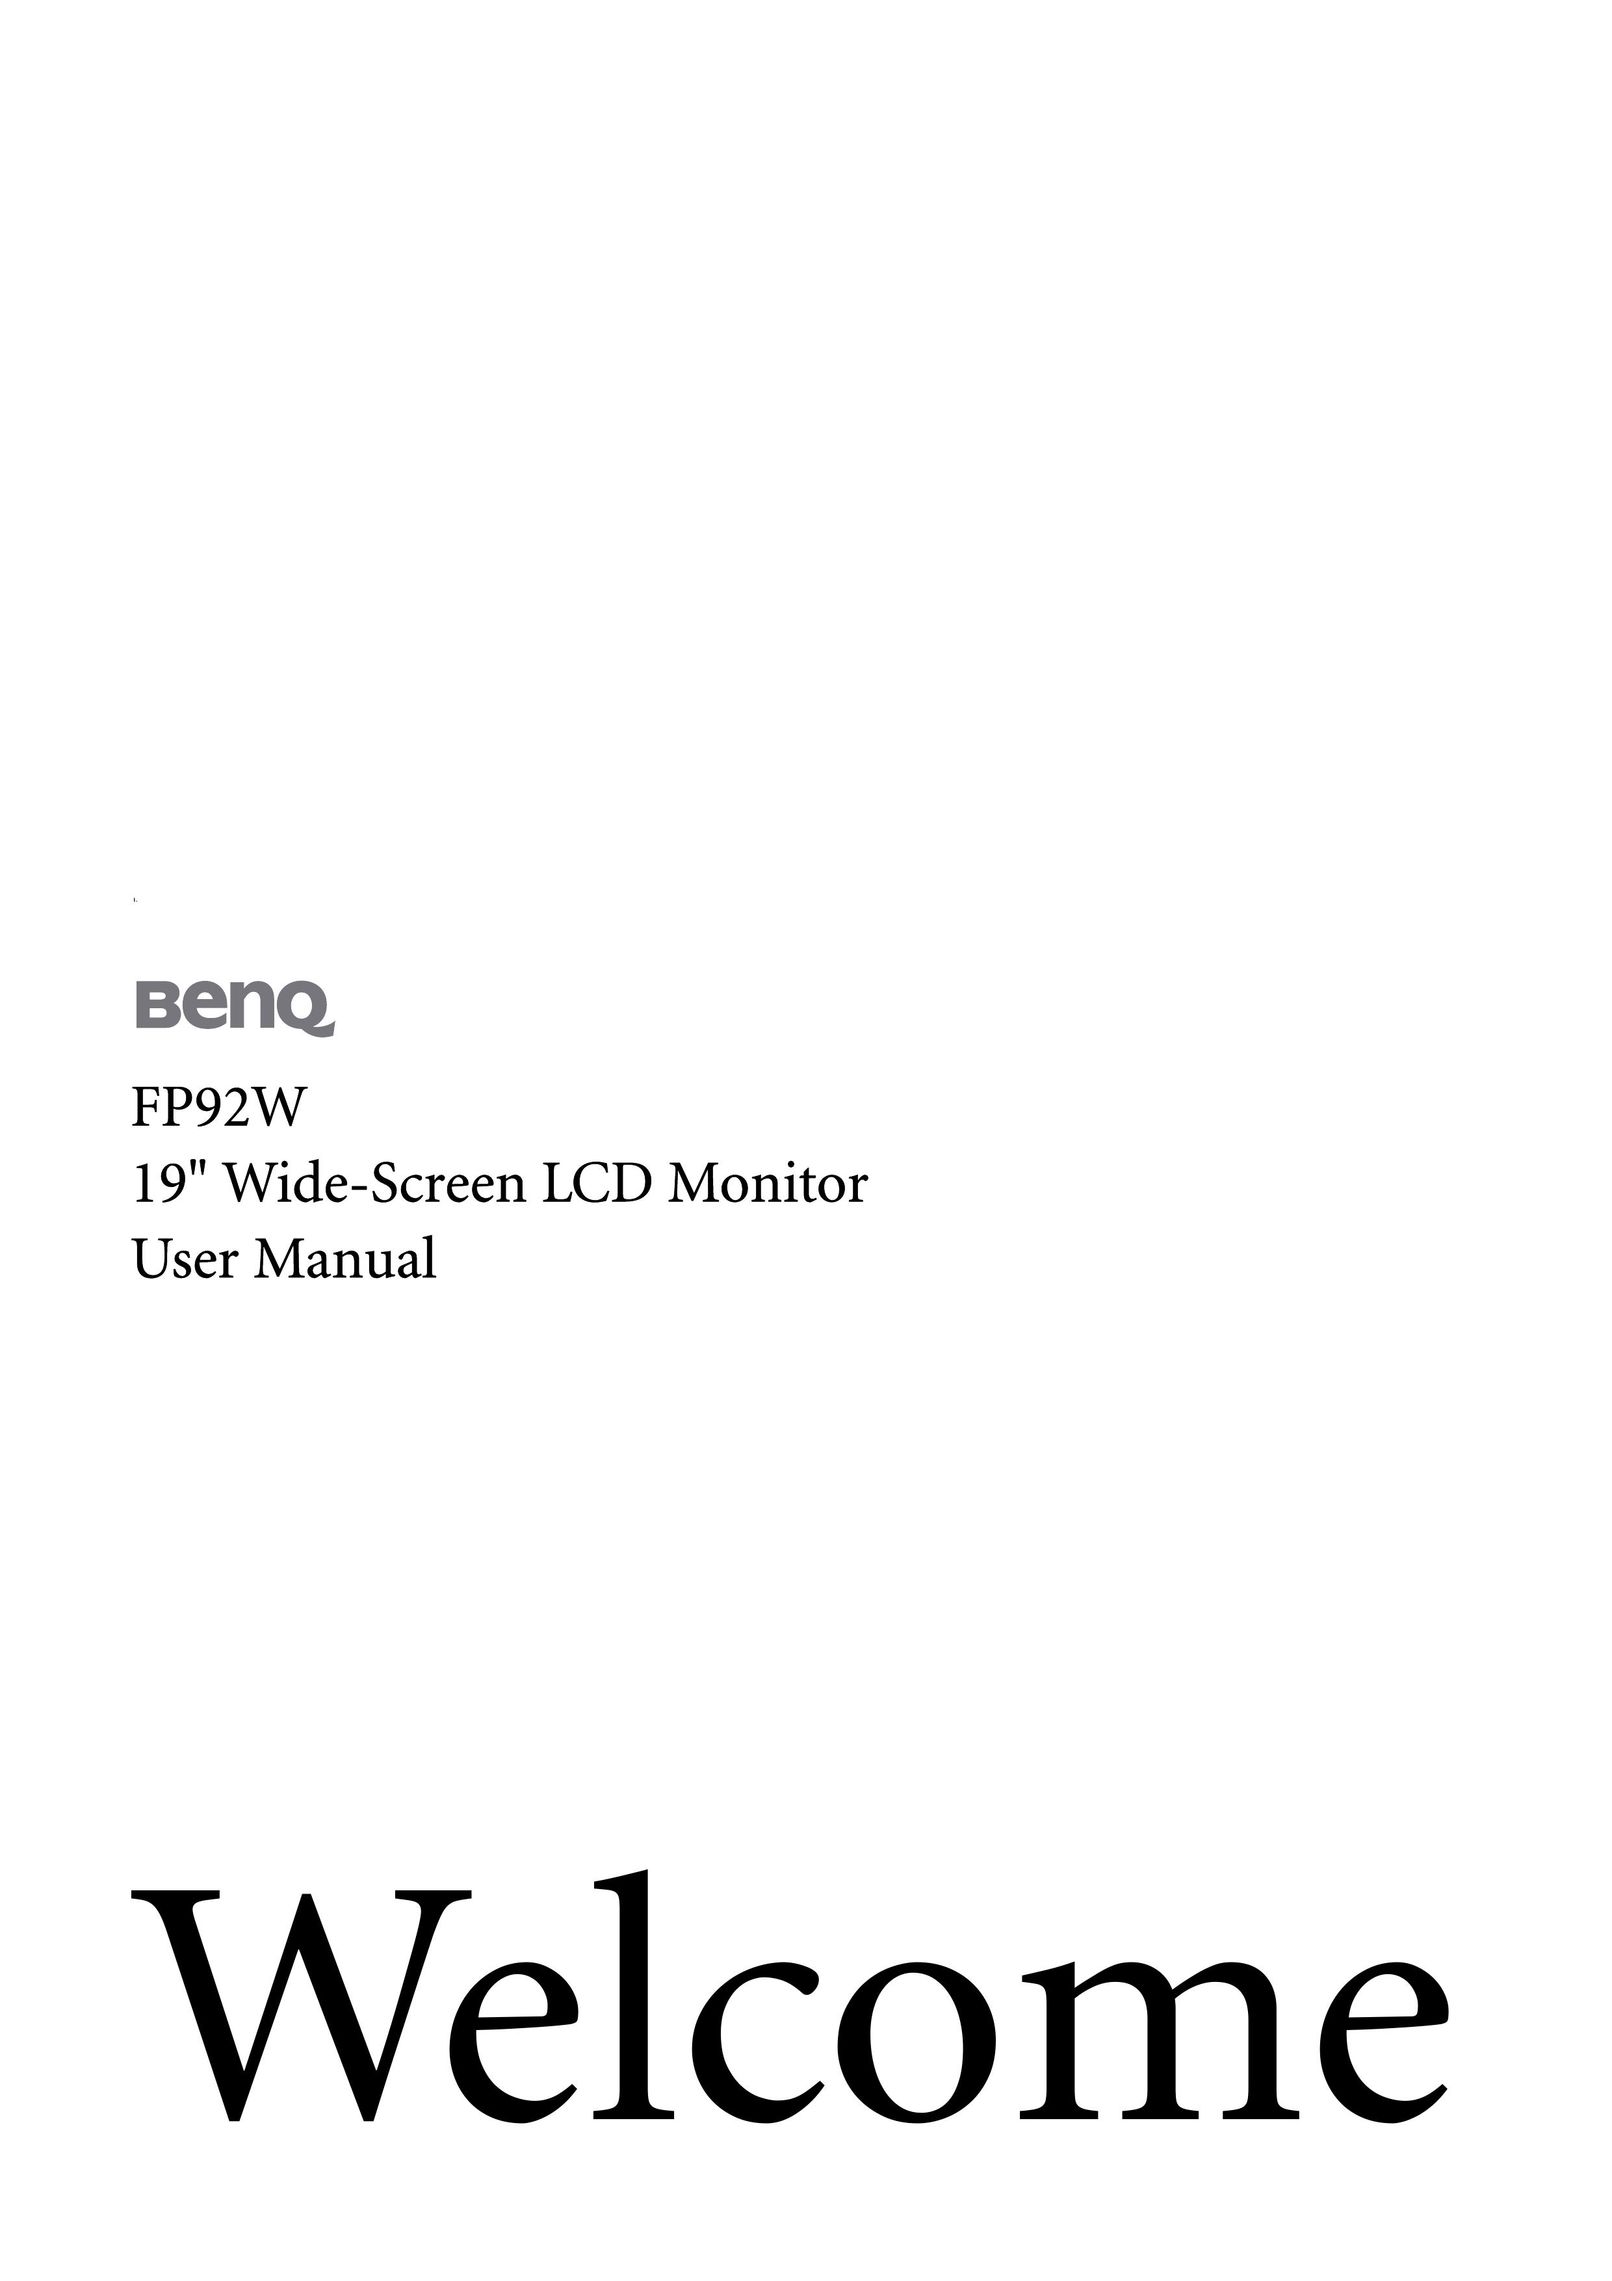 BenQ FP92W Car Video System User Manual (Page 1)